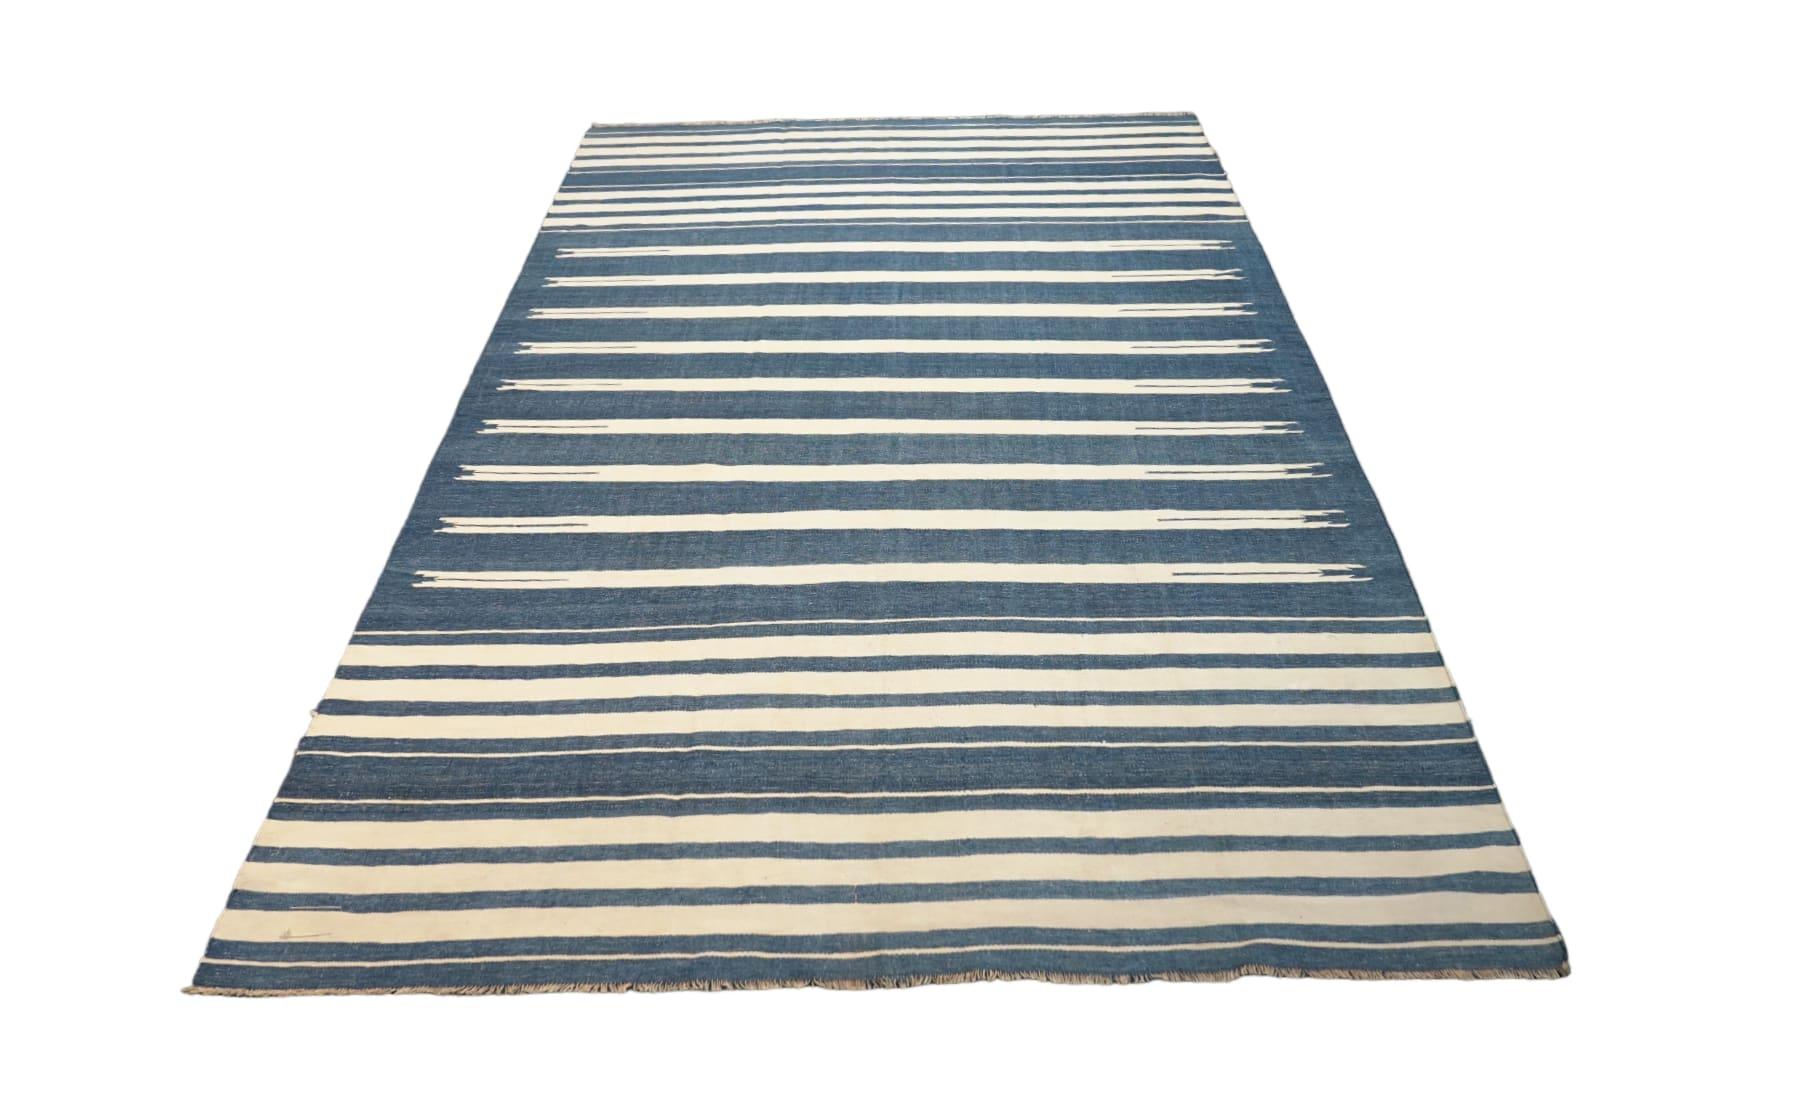 This vintage 5x8 Dhurrie flat weave is an exciting new entry in Rug & Kilim’s esteemed collection. Handwoven in wool, it originates from India circa 1950-1960. 

On the Design: 

From Rug & Kilim’s exclusive collection of vintage flatweaves, a